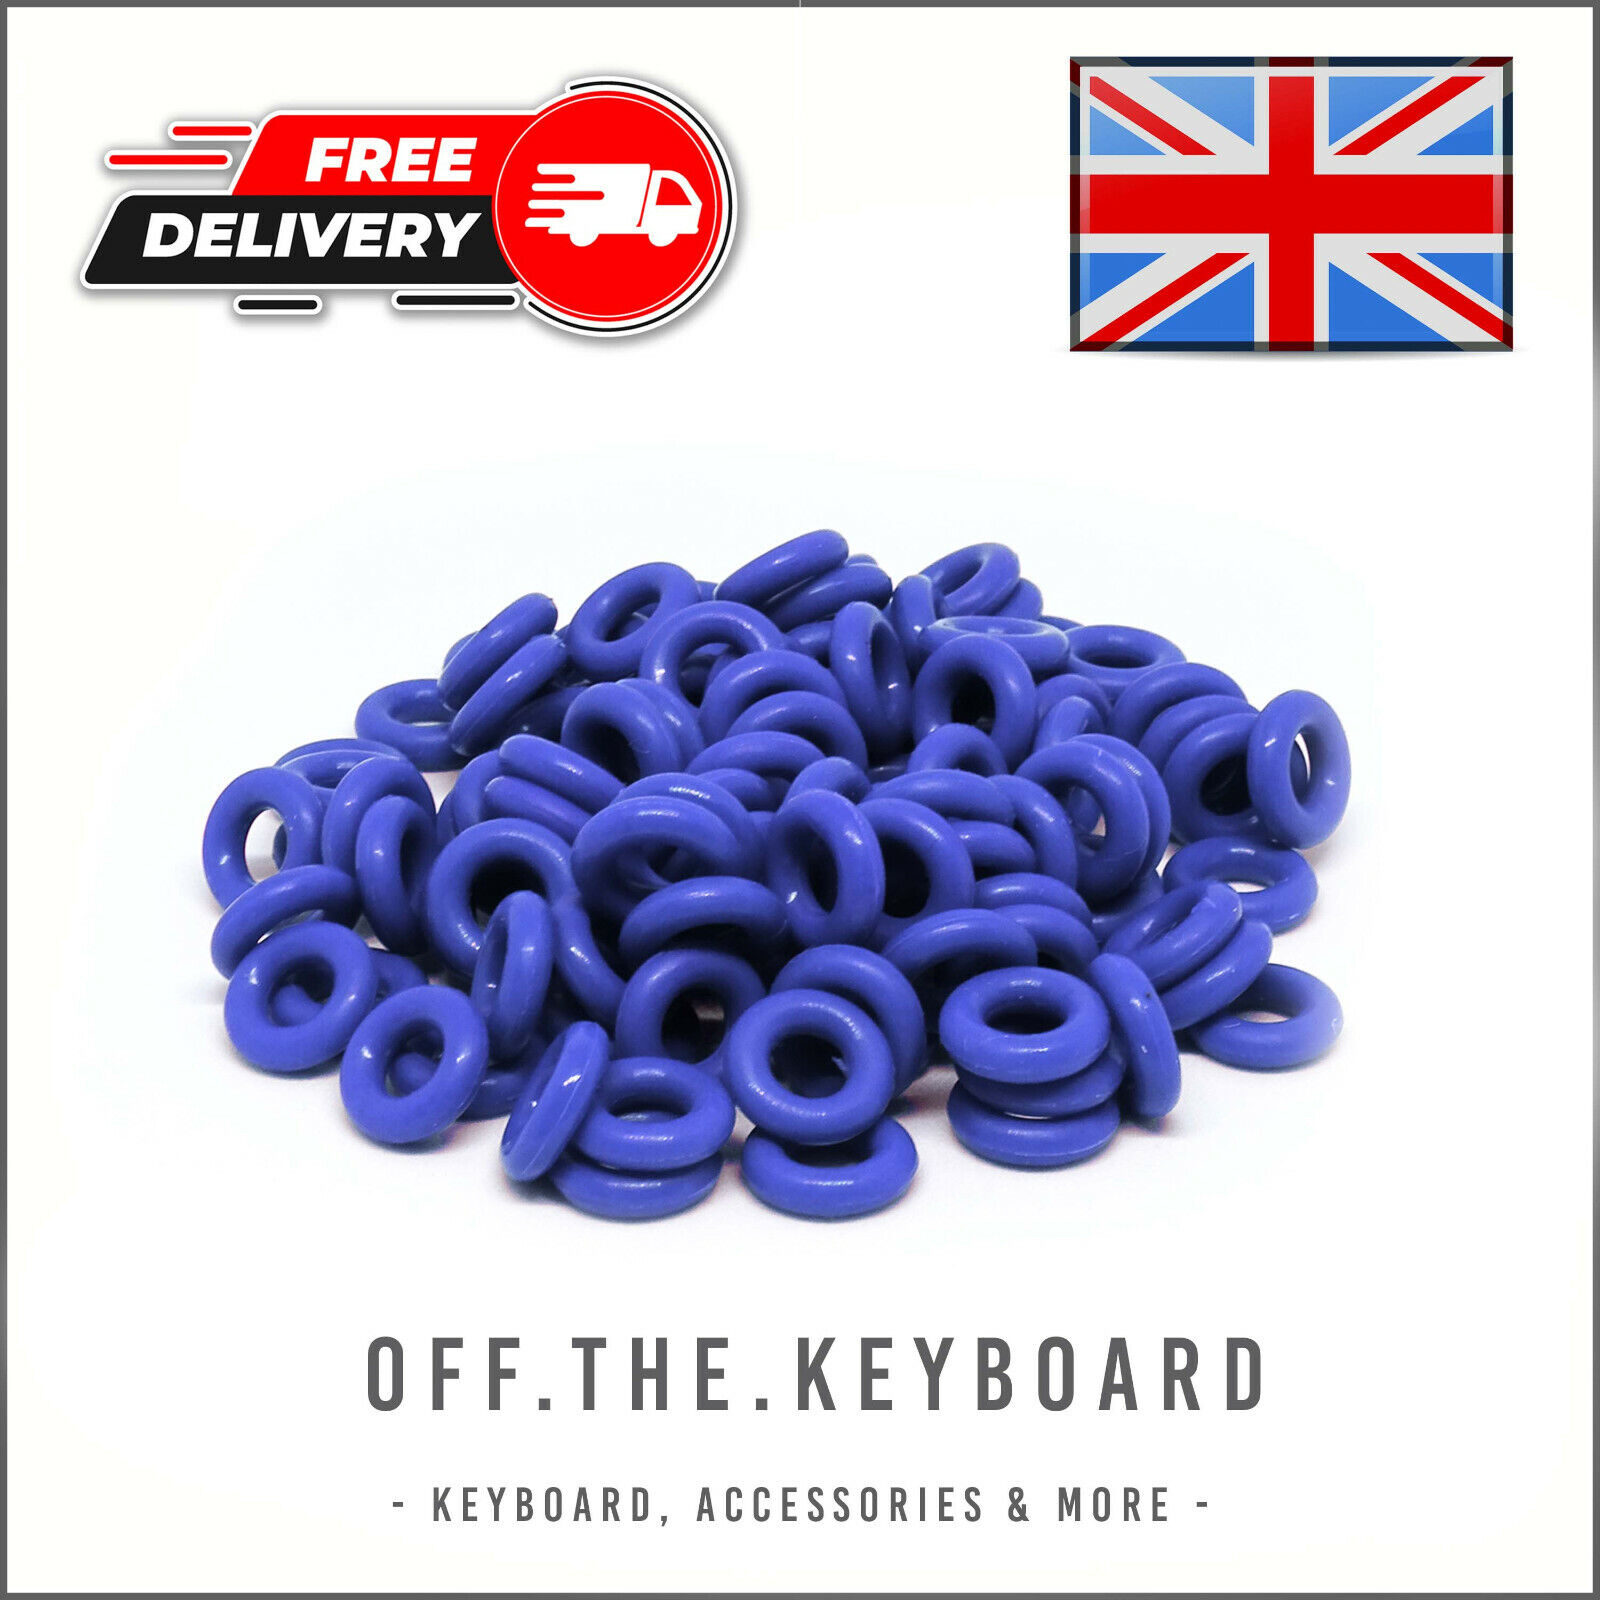 110Pcs O-Rings Keyboard Switch Dampeners 2.5mm Blue for Cherry MX Keycaps